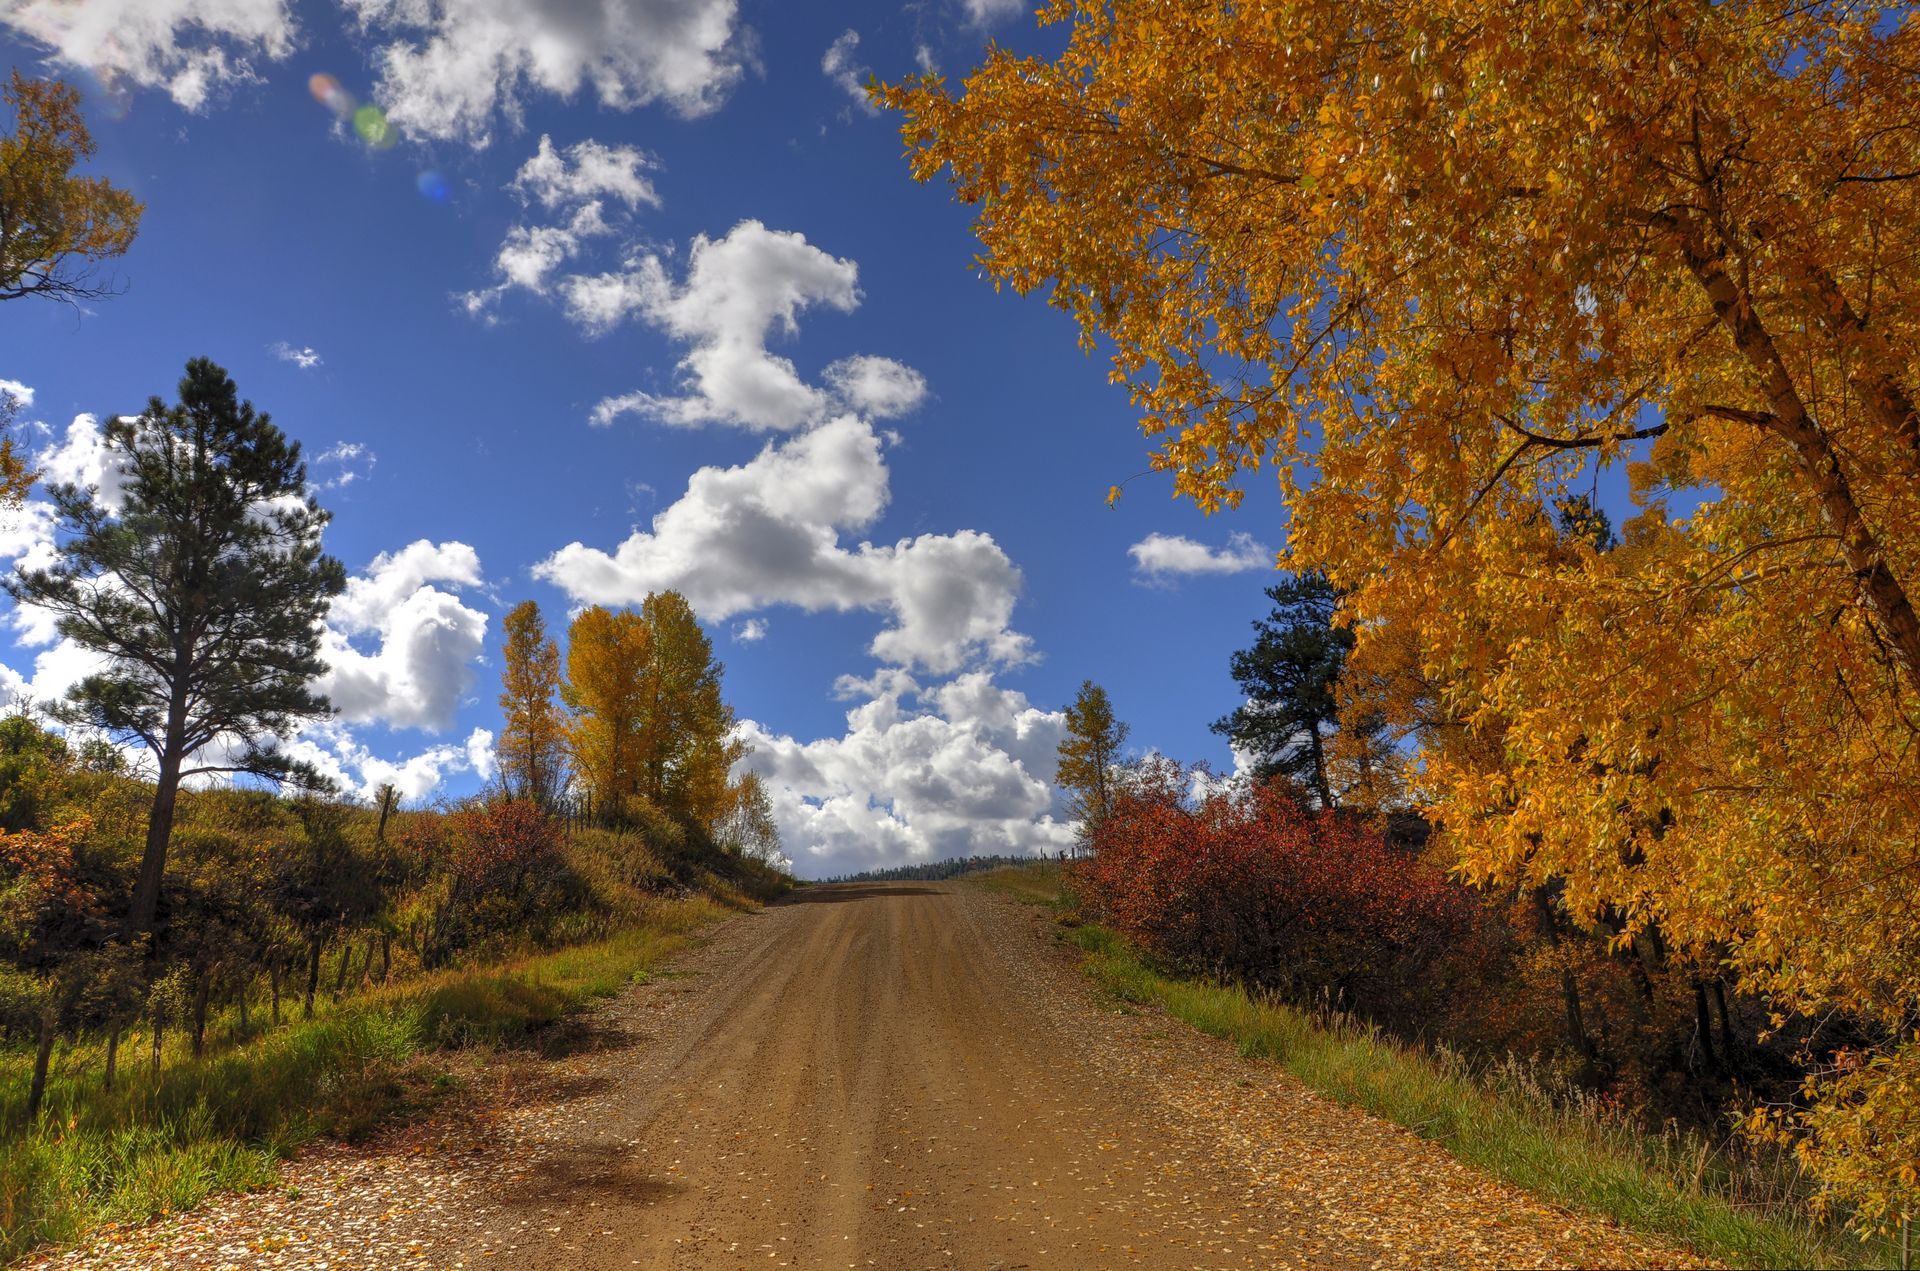 Autumn in New Mexico